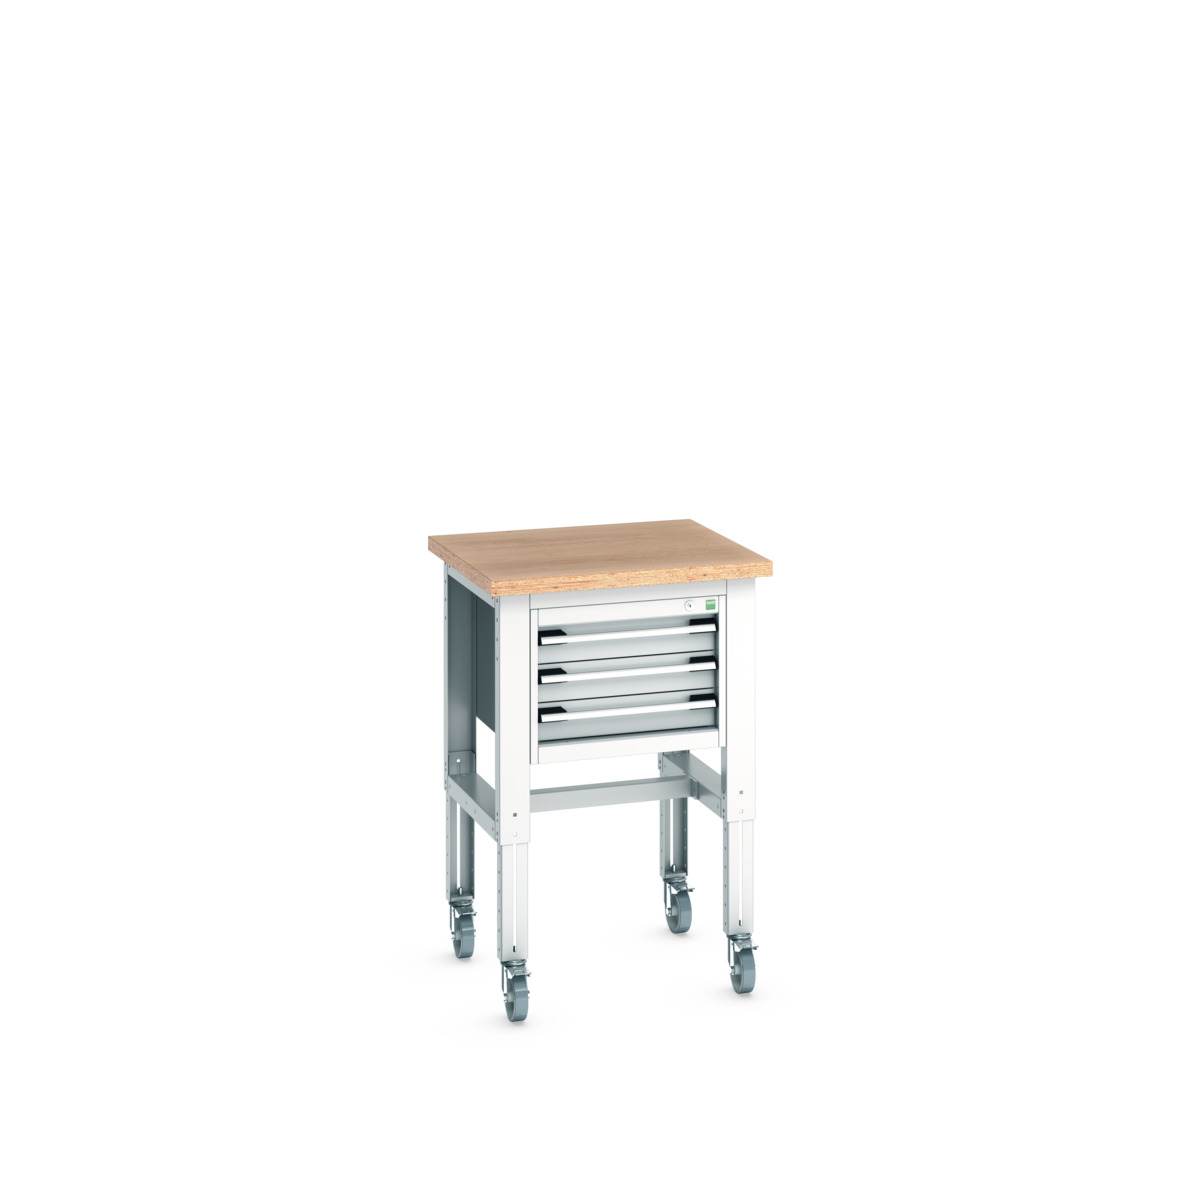 41003527.16V - cubio mobile bench adj height (mpx)